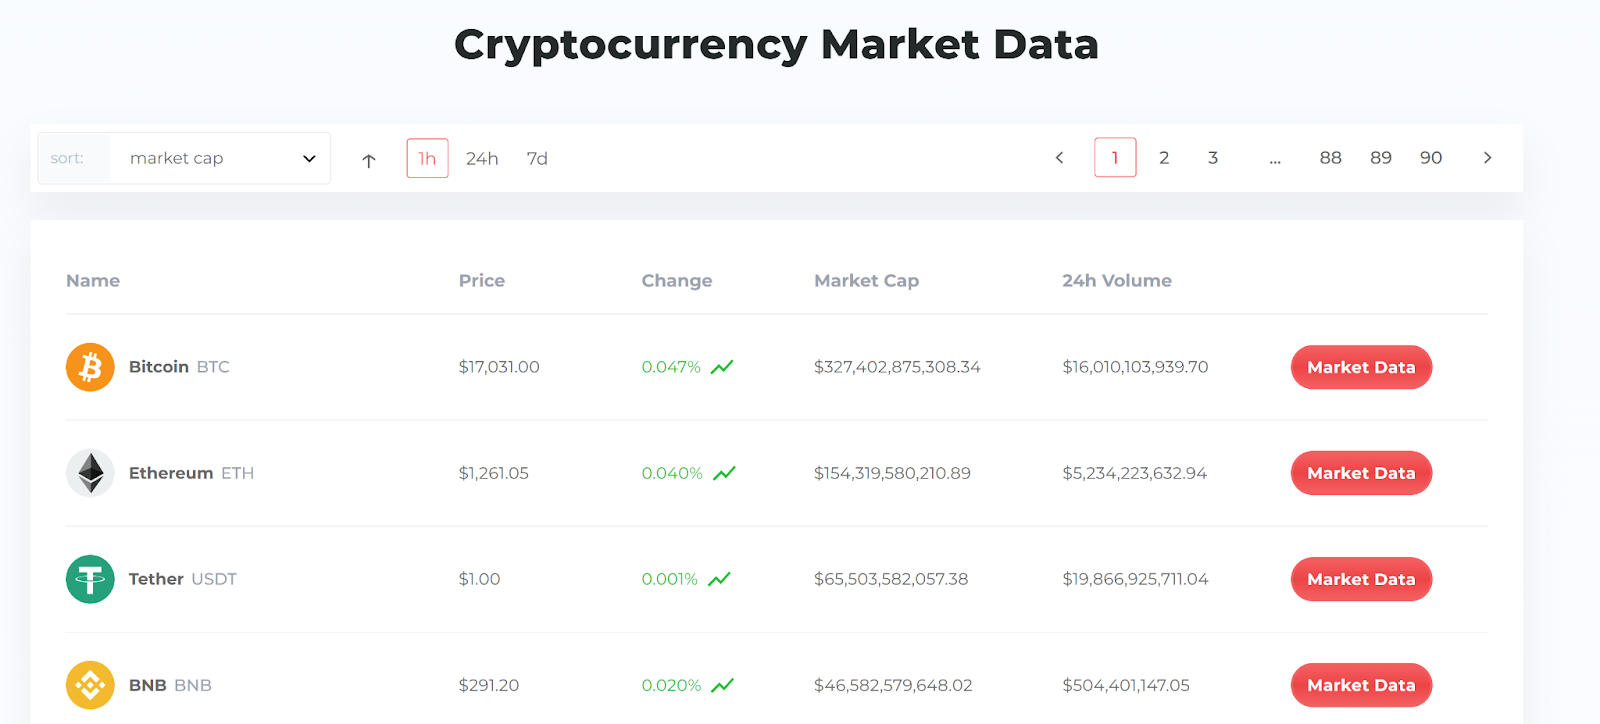 Cryptocurrency market data 